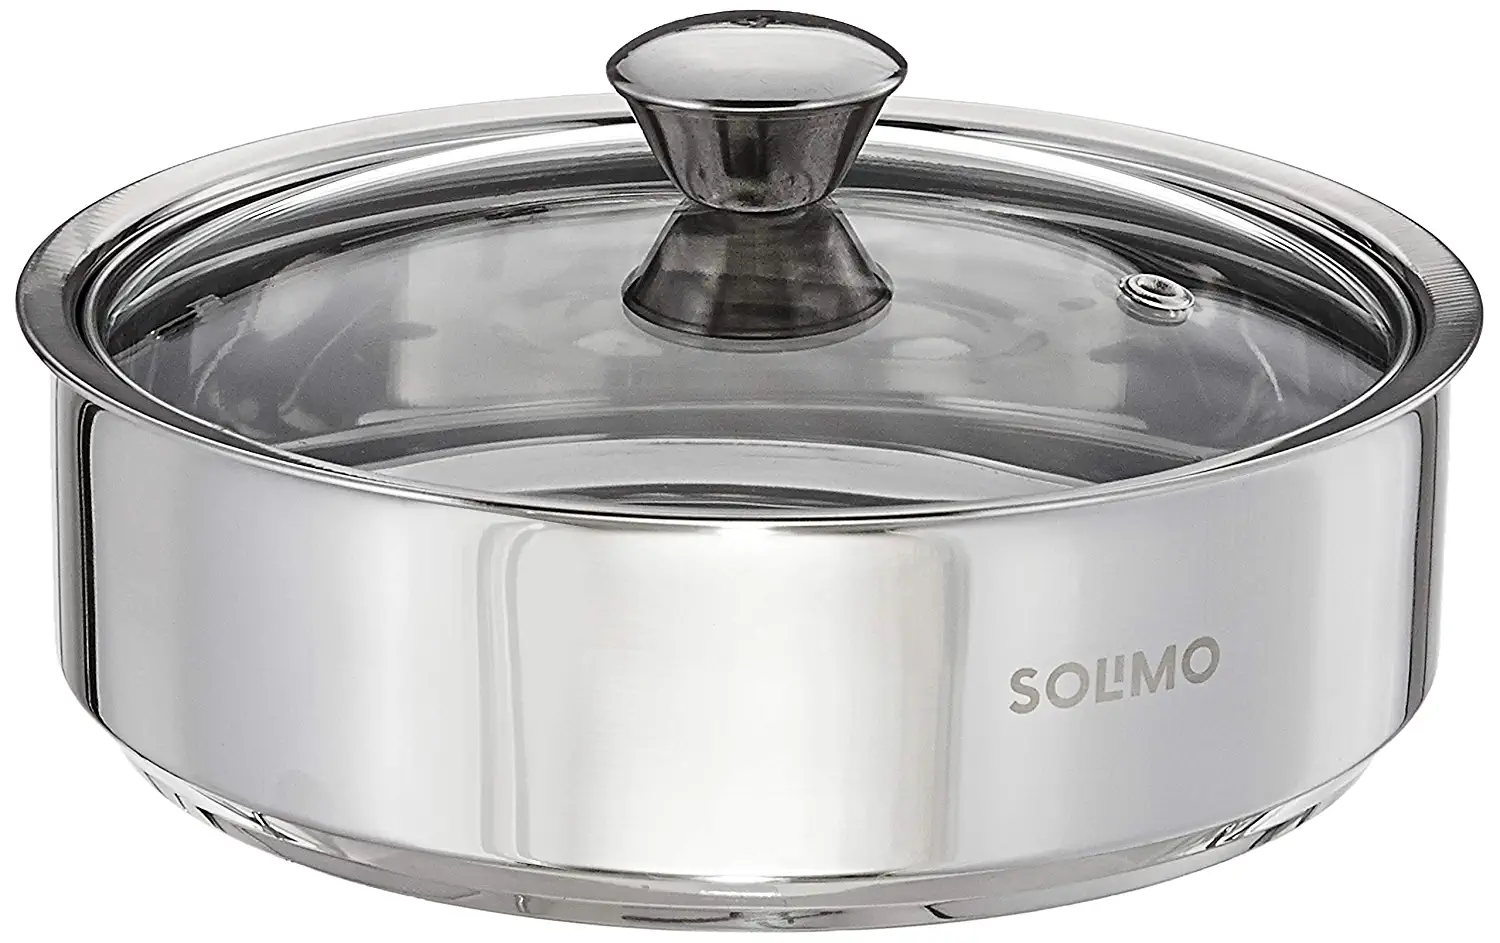 Amazon Brand - Solimo STAINLESS STEEL